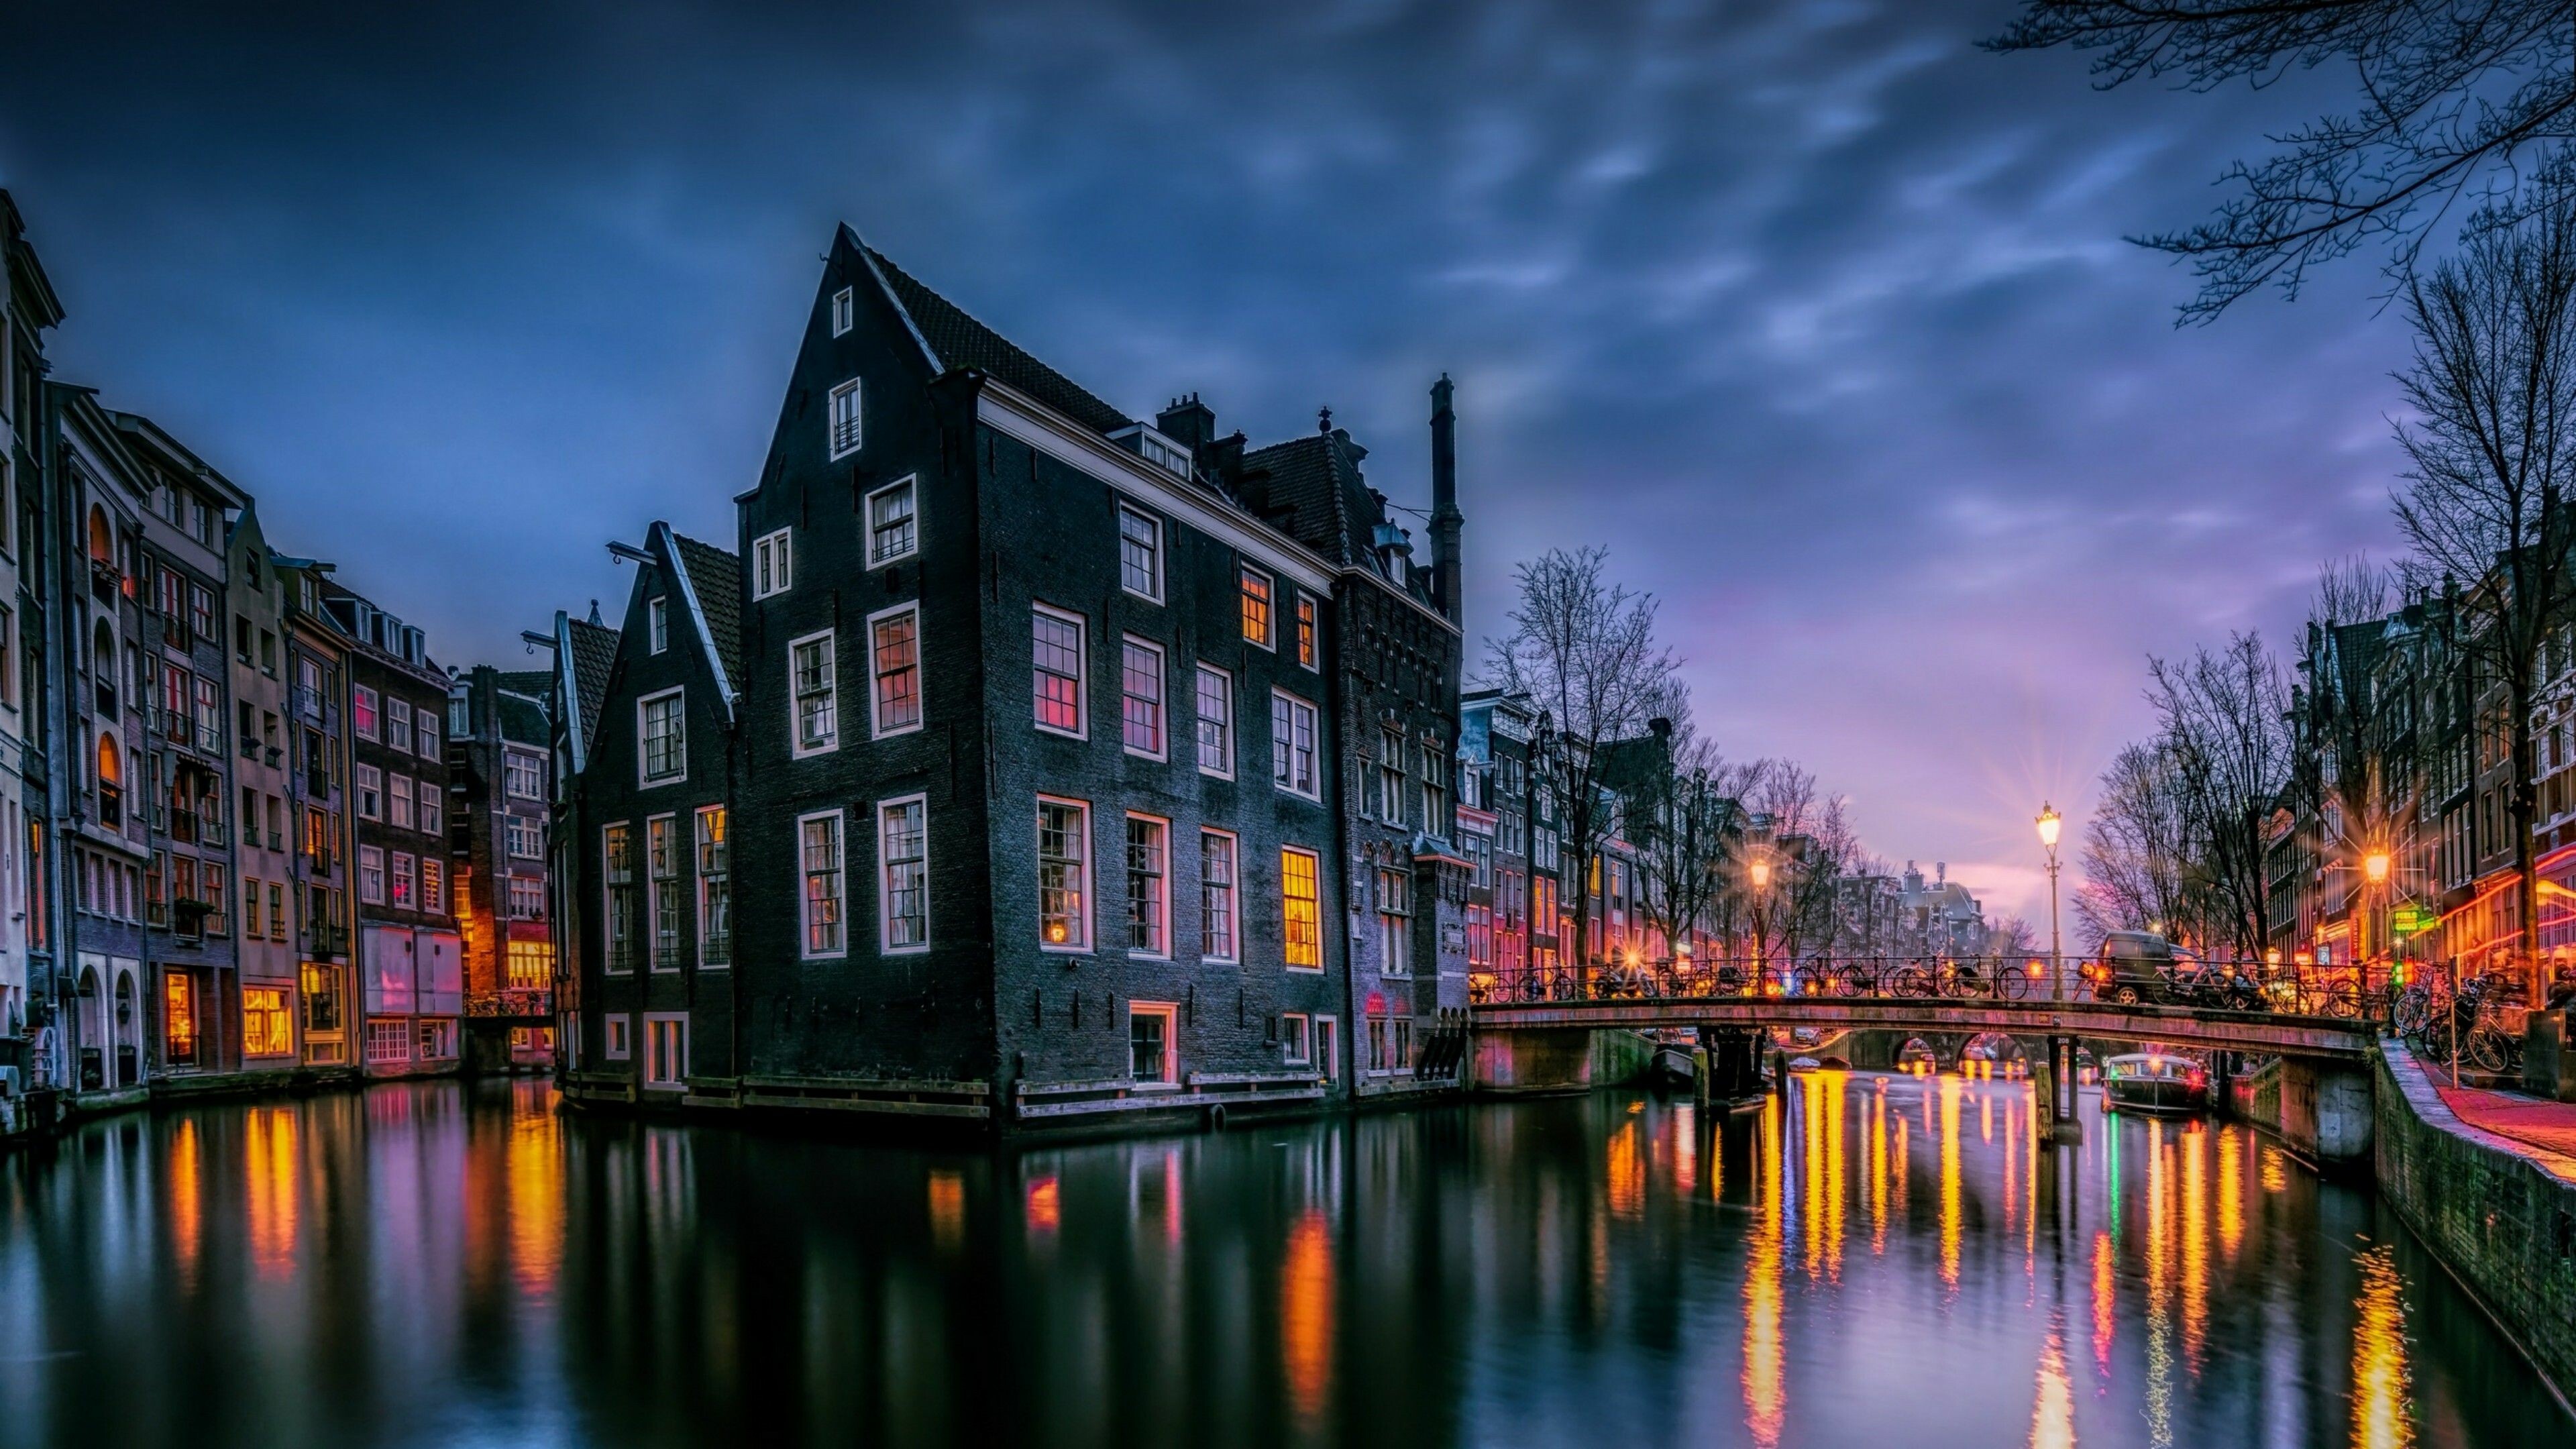 Amsterdam: The capital and most populous city of the Netherlands, Canals. 3840x2160 4K Wallpaper.